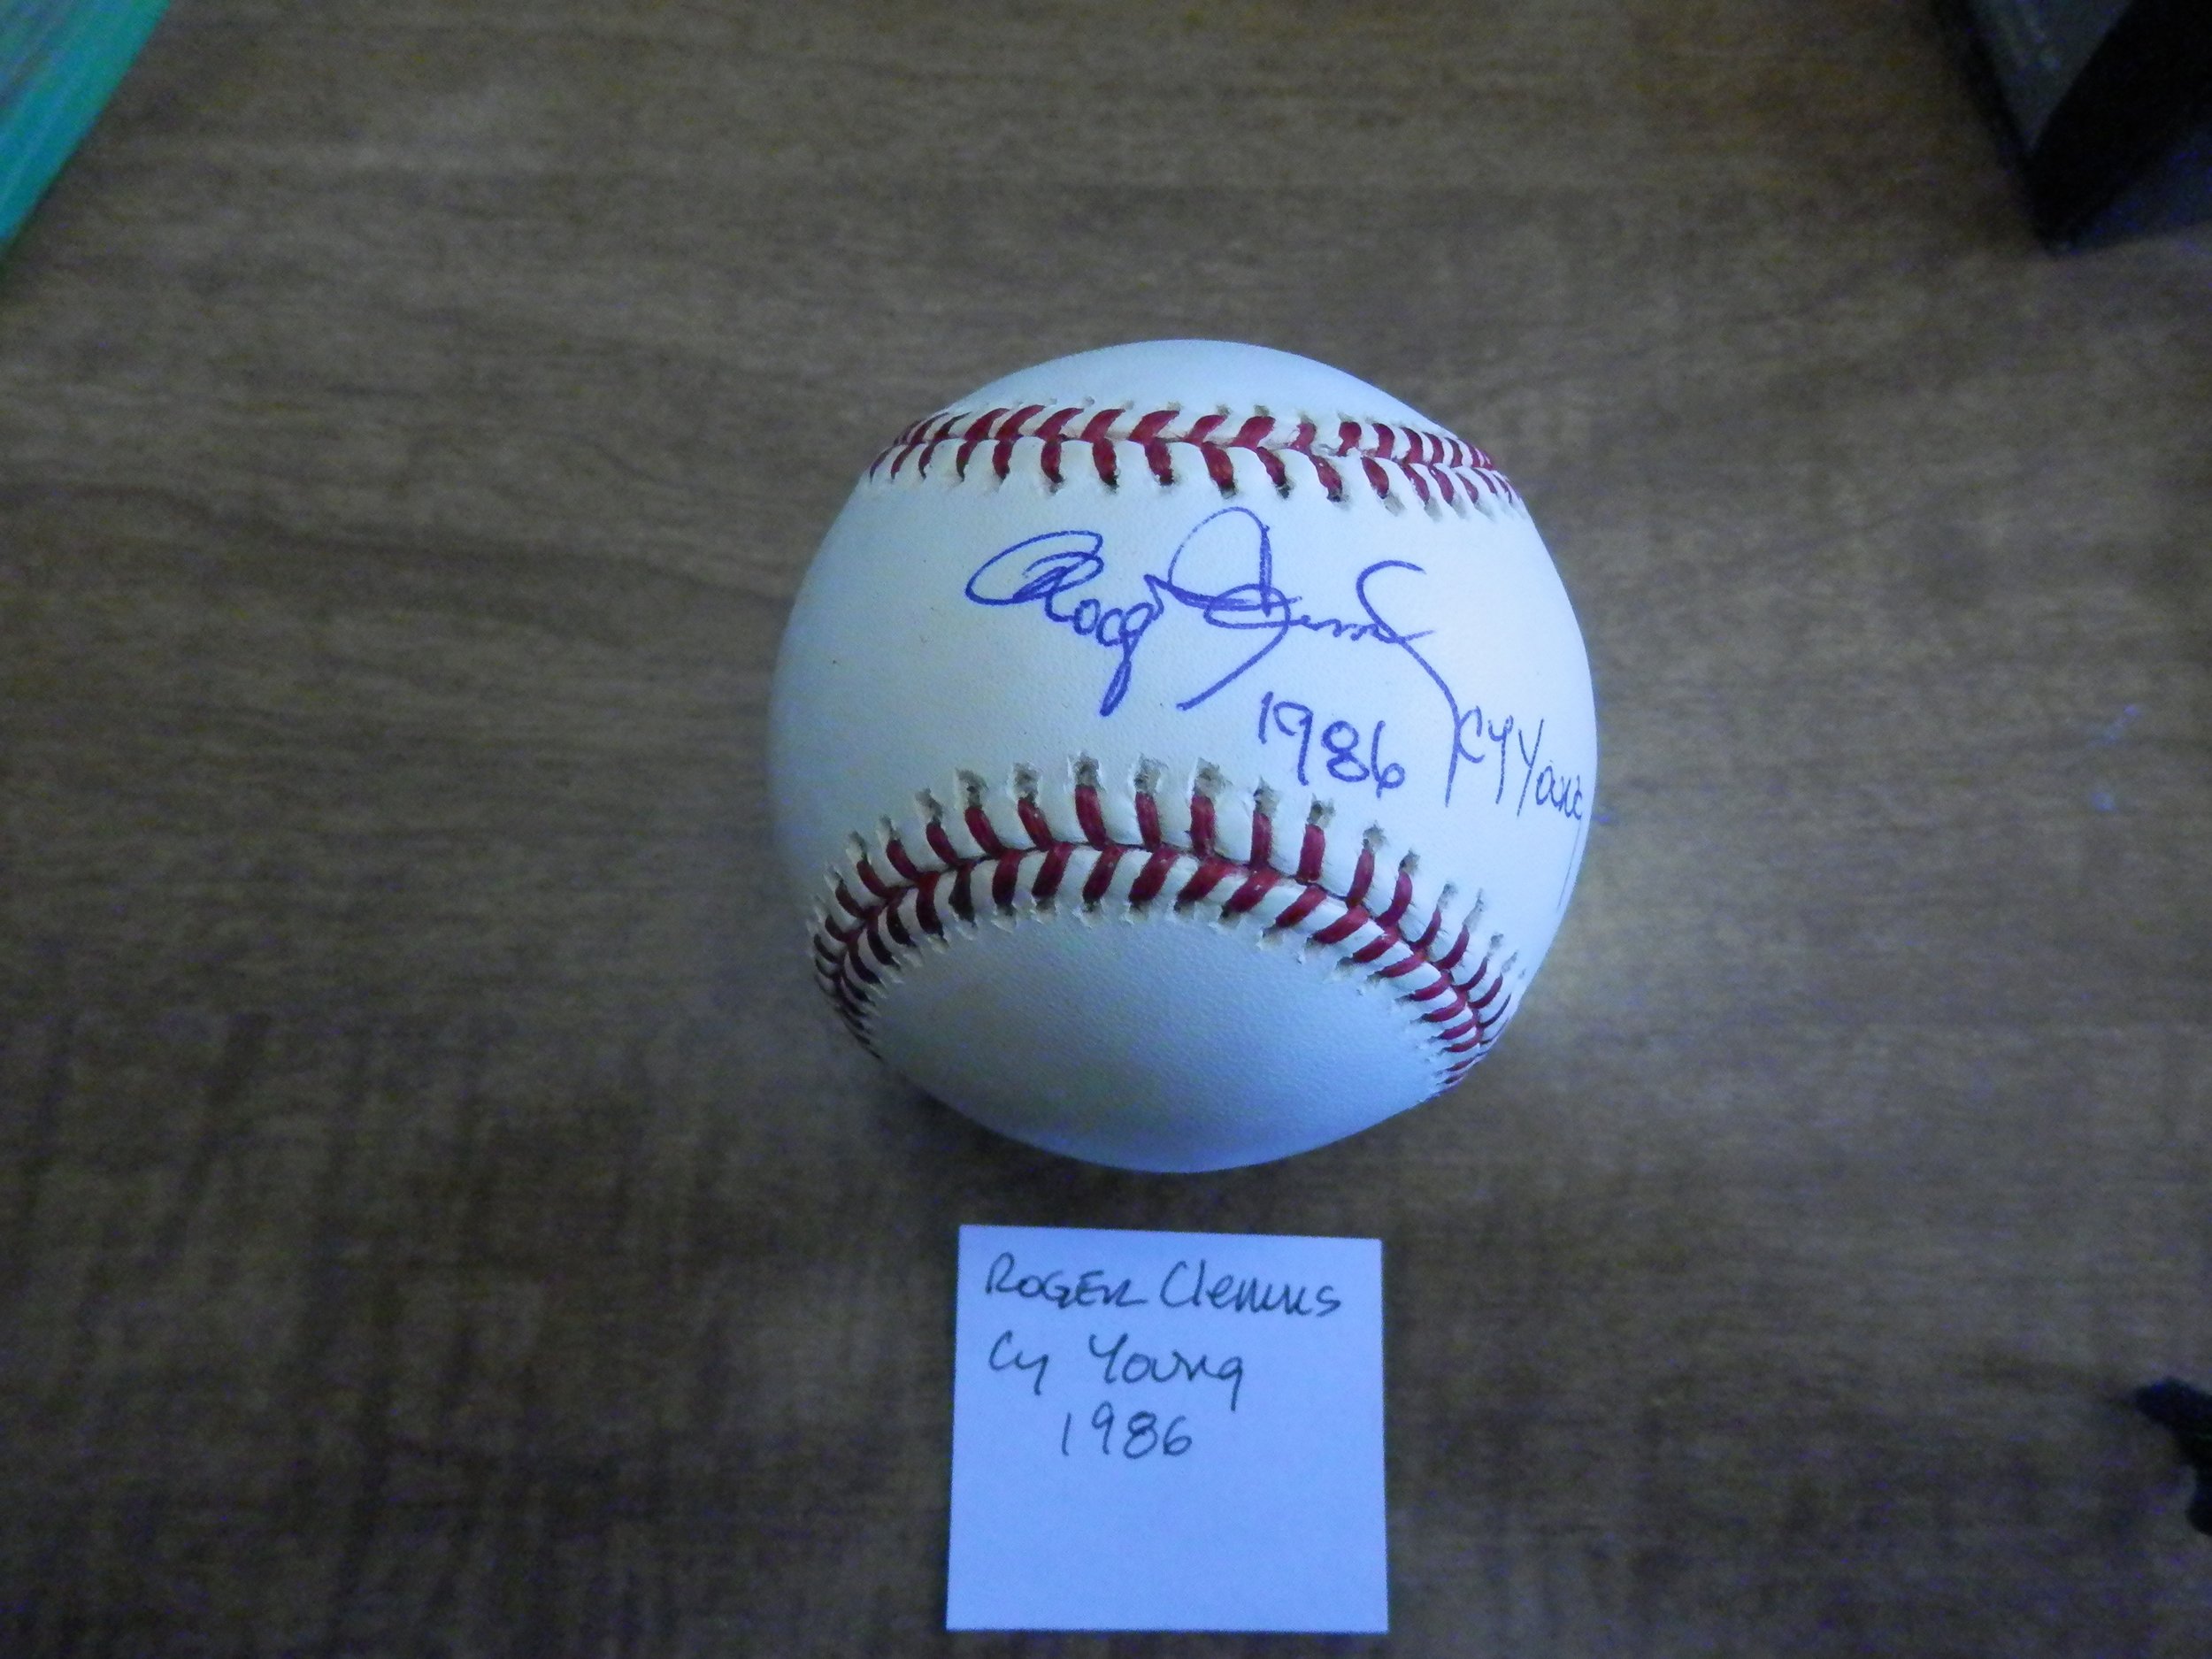 Roger Clemens -CY Young 